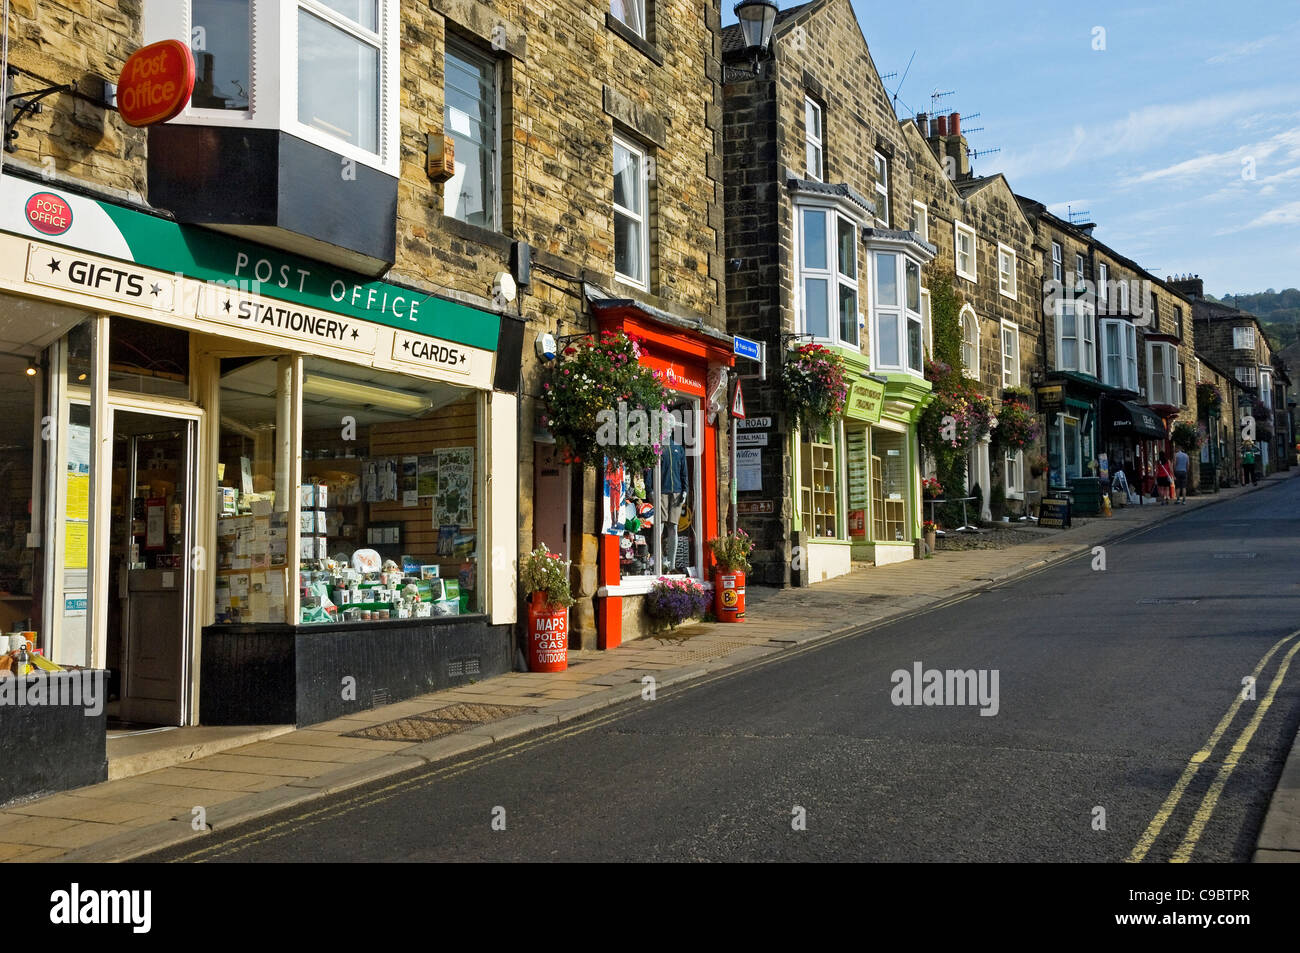 Village shops stores on High Street in autumn Pateley Bridge Nidderdale North Yorkshire Dales England UK United Kingdom GB Great Britain Stock Photo